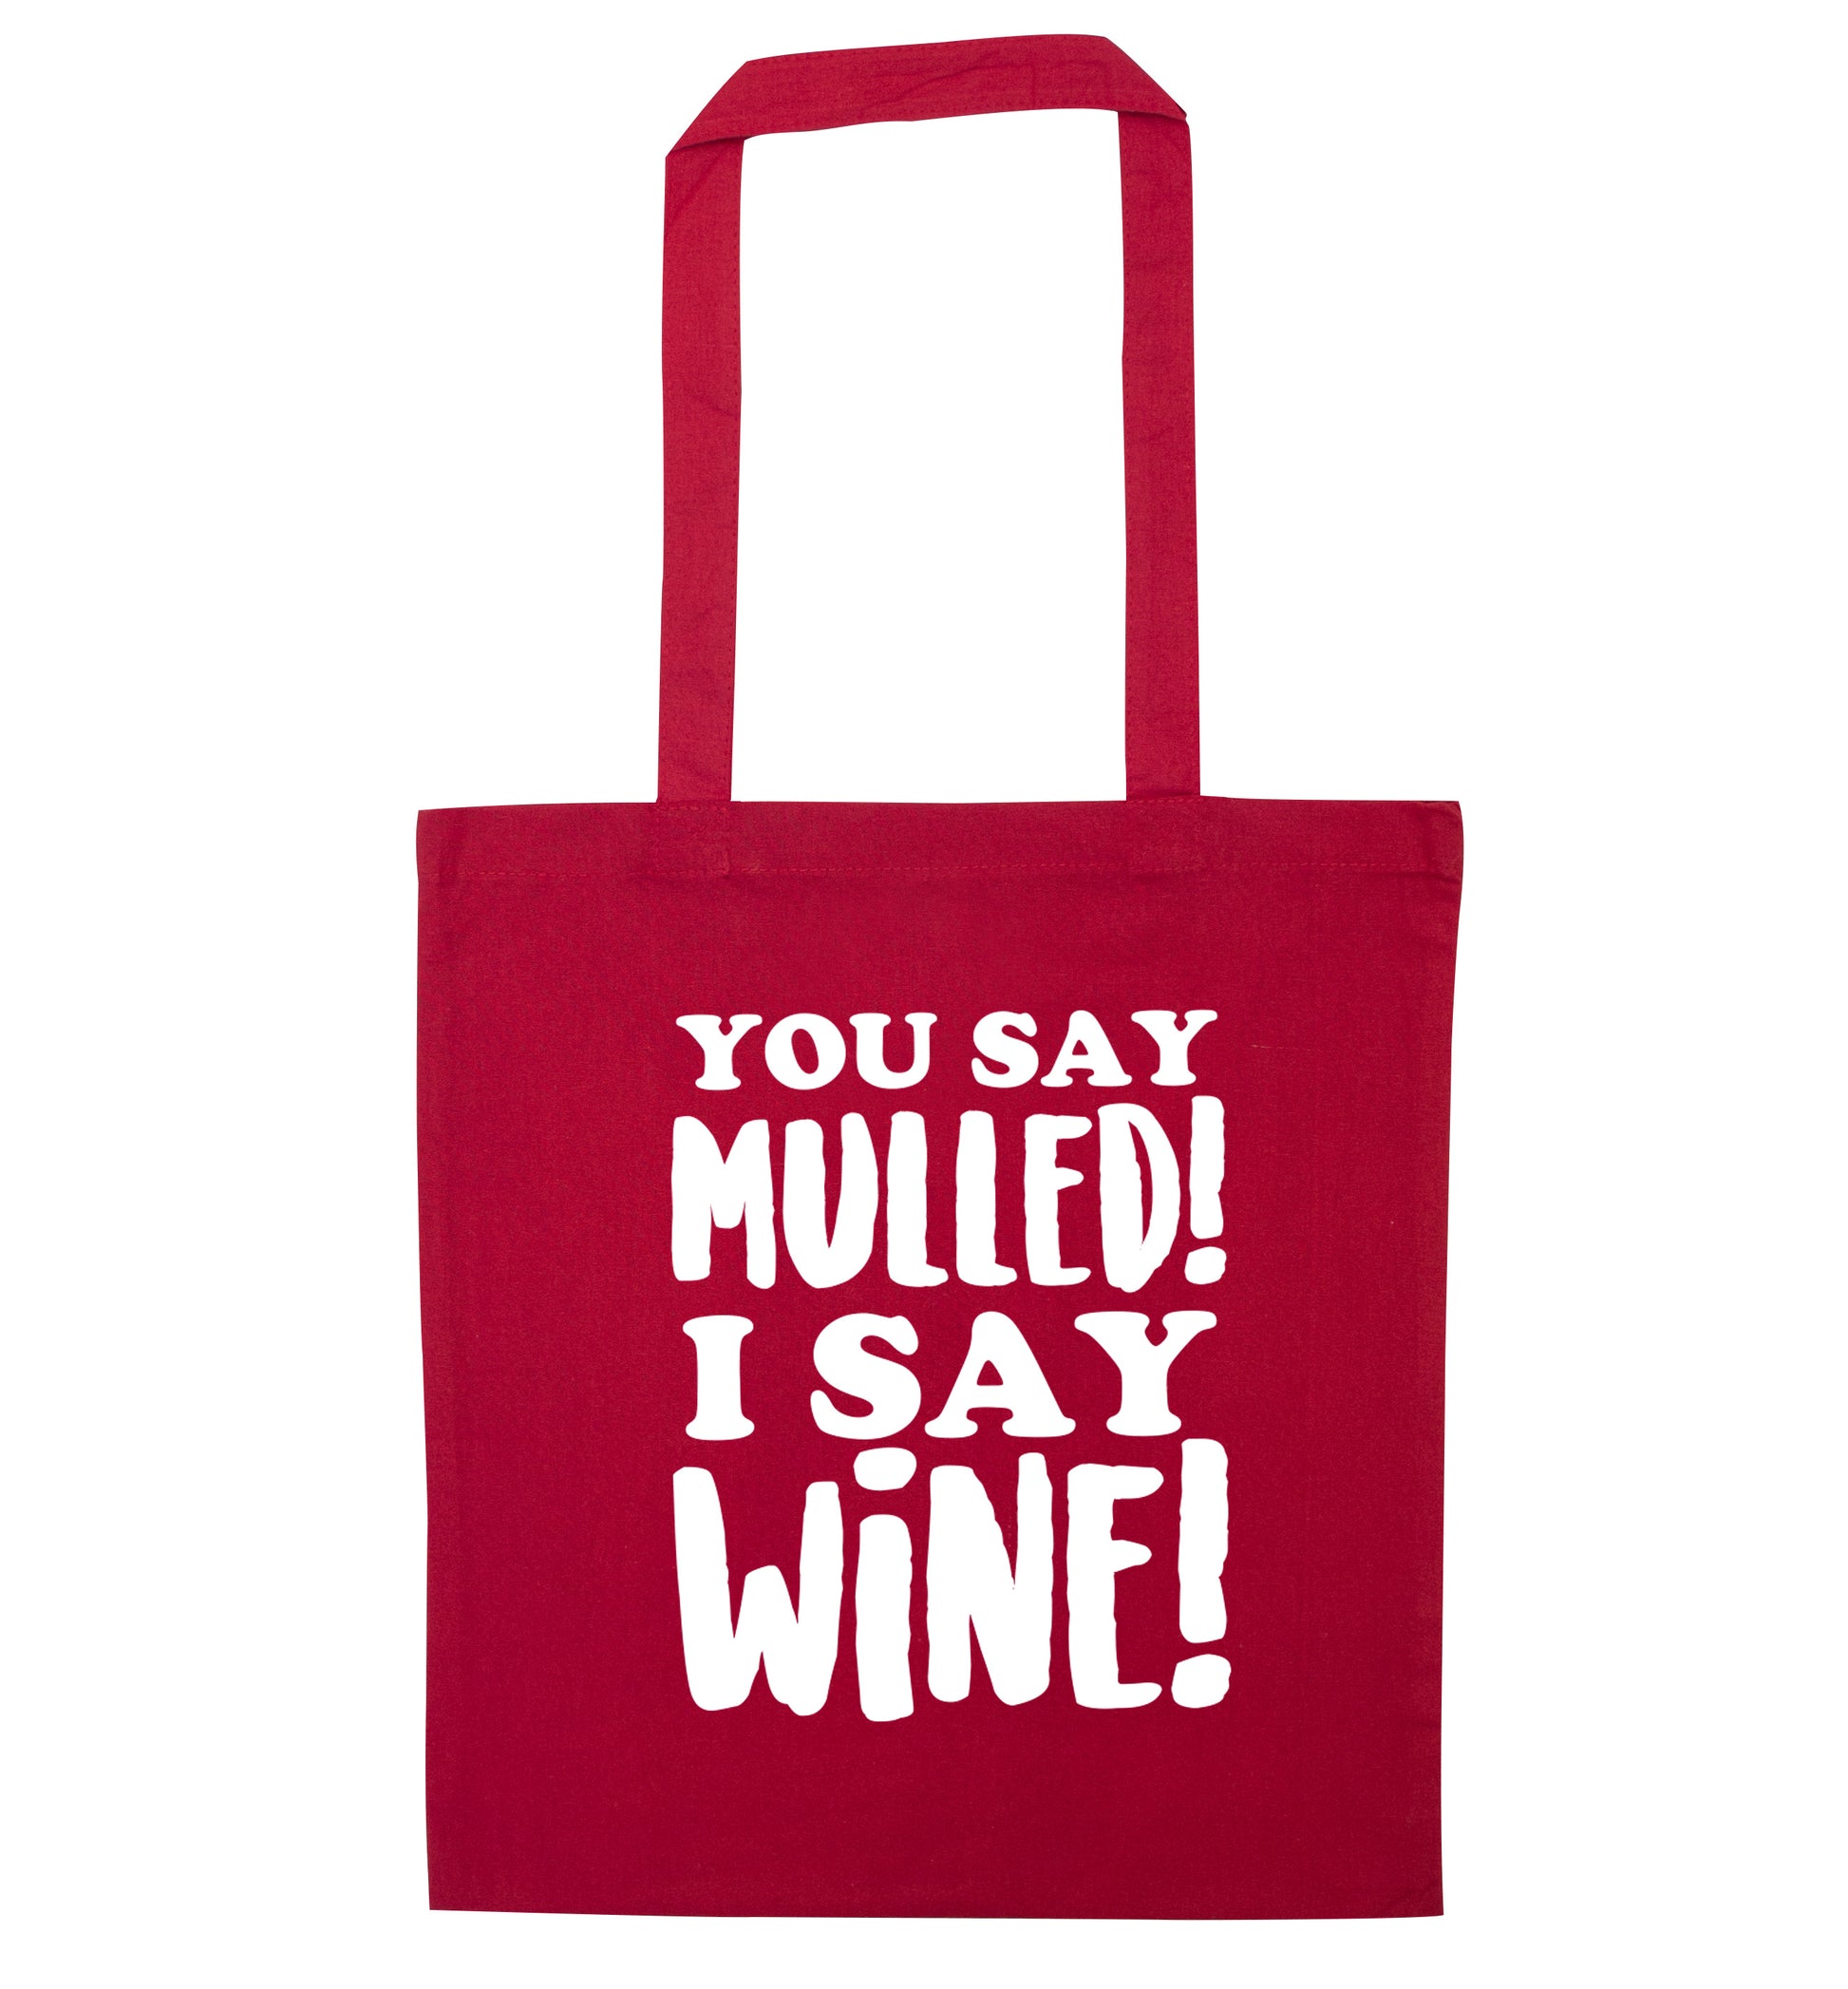 You say mulled I say wine! red tote bag